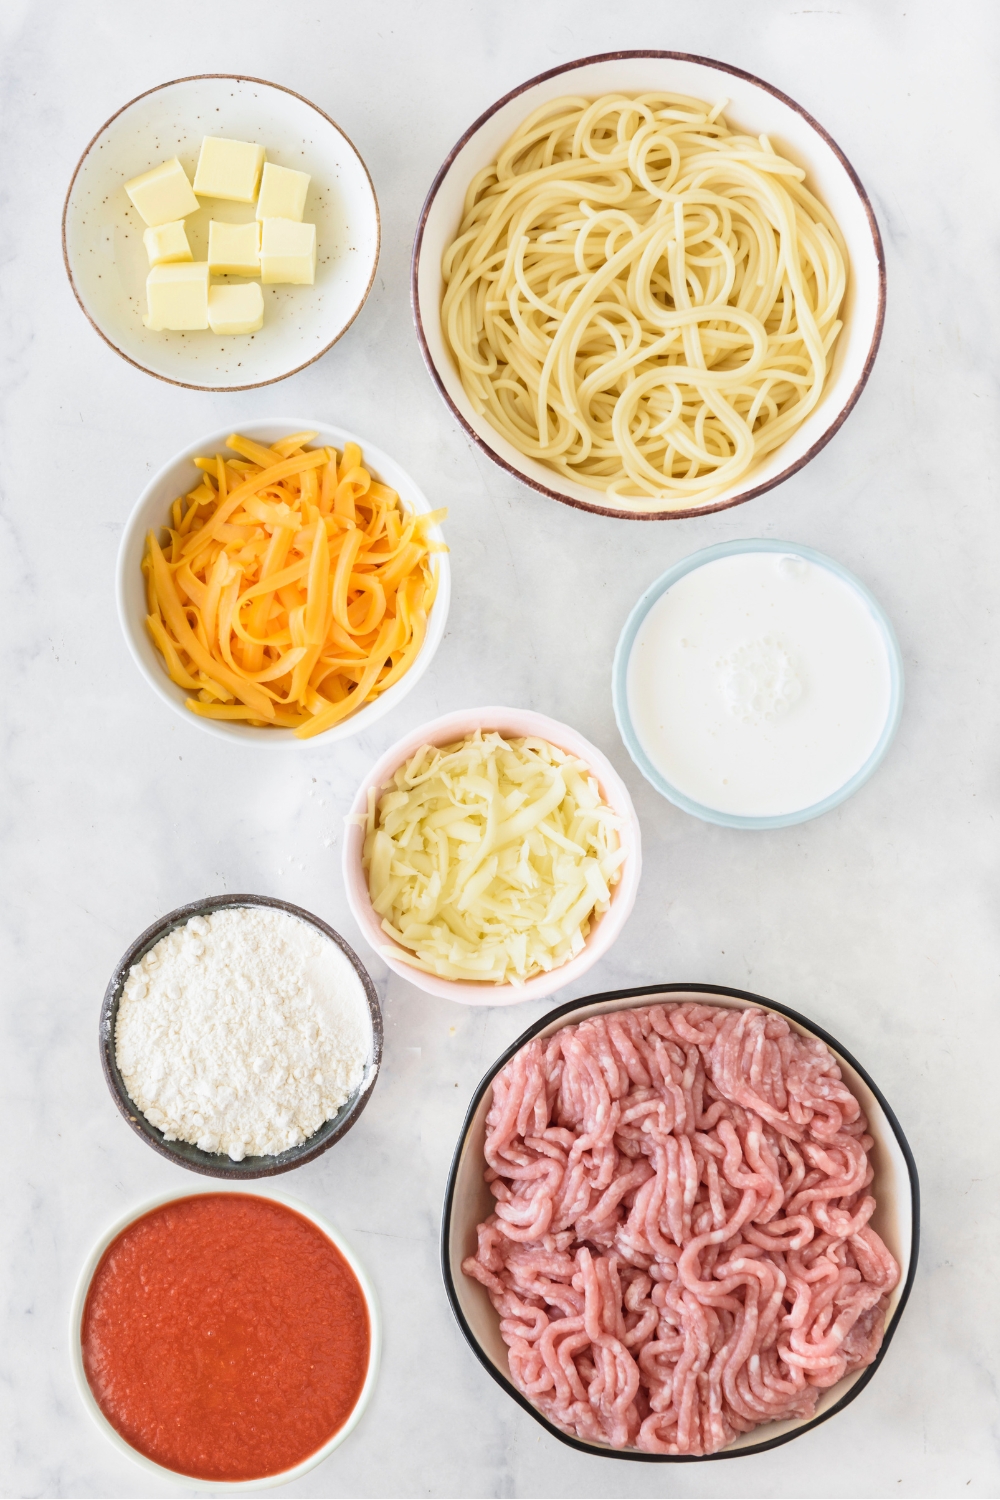 An assortment of ingredients including bowls of cooked spaghetti noodles, tomato sauce, raw ground meat, shredded cheese, flour, cream, and butter.